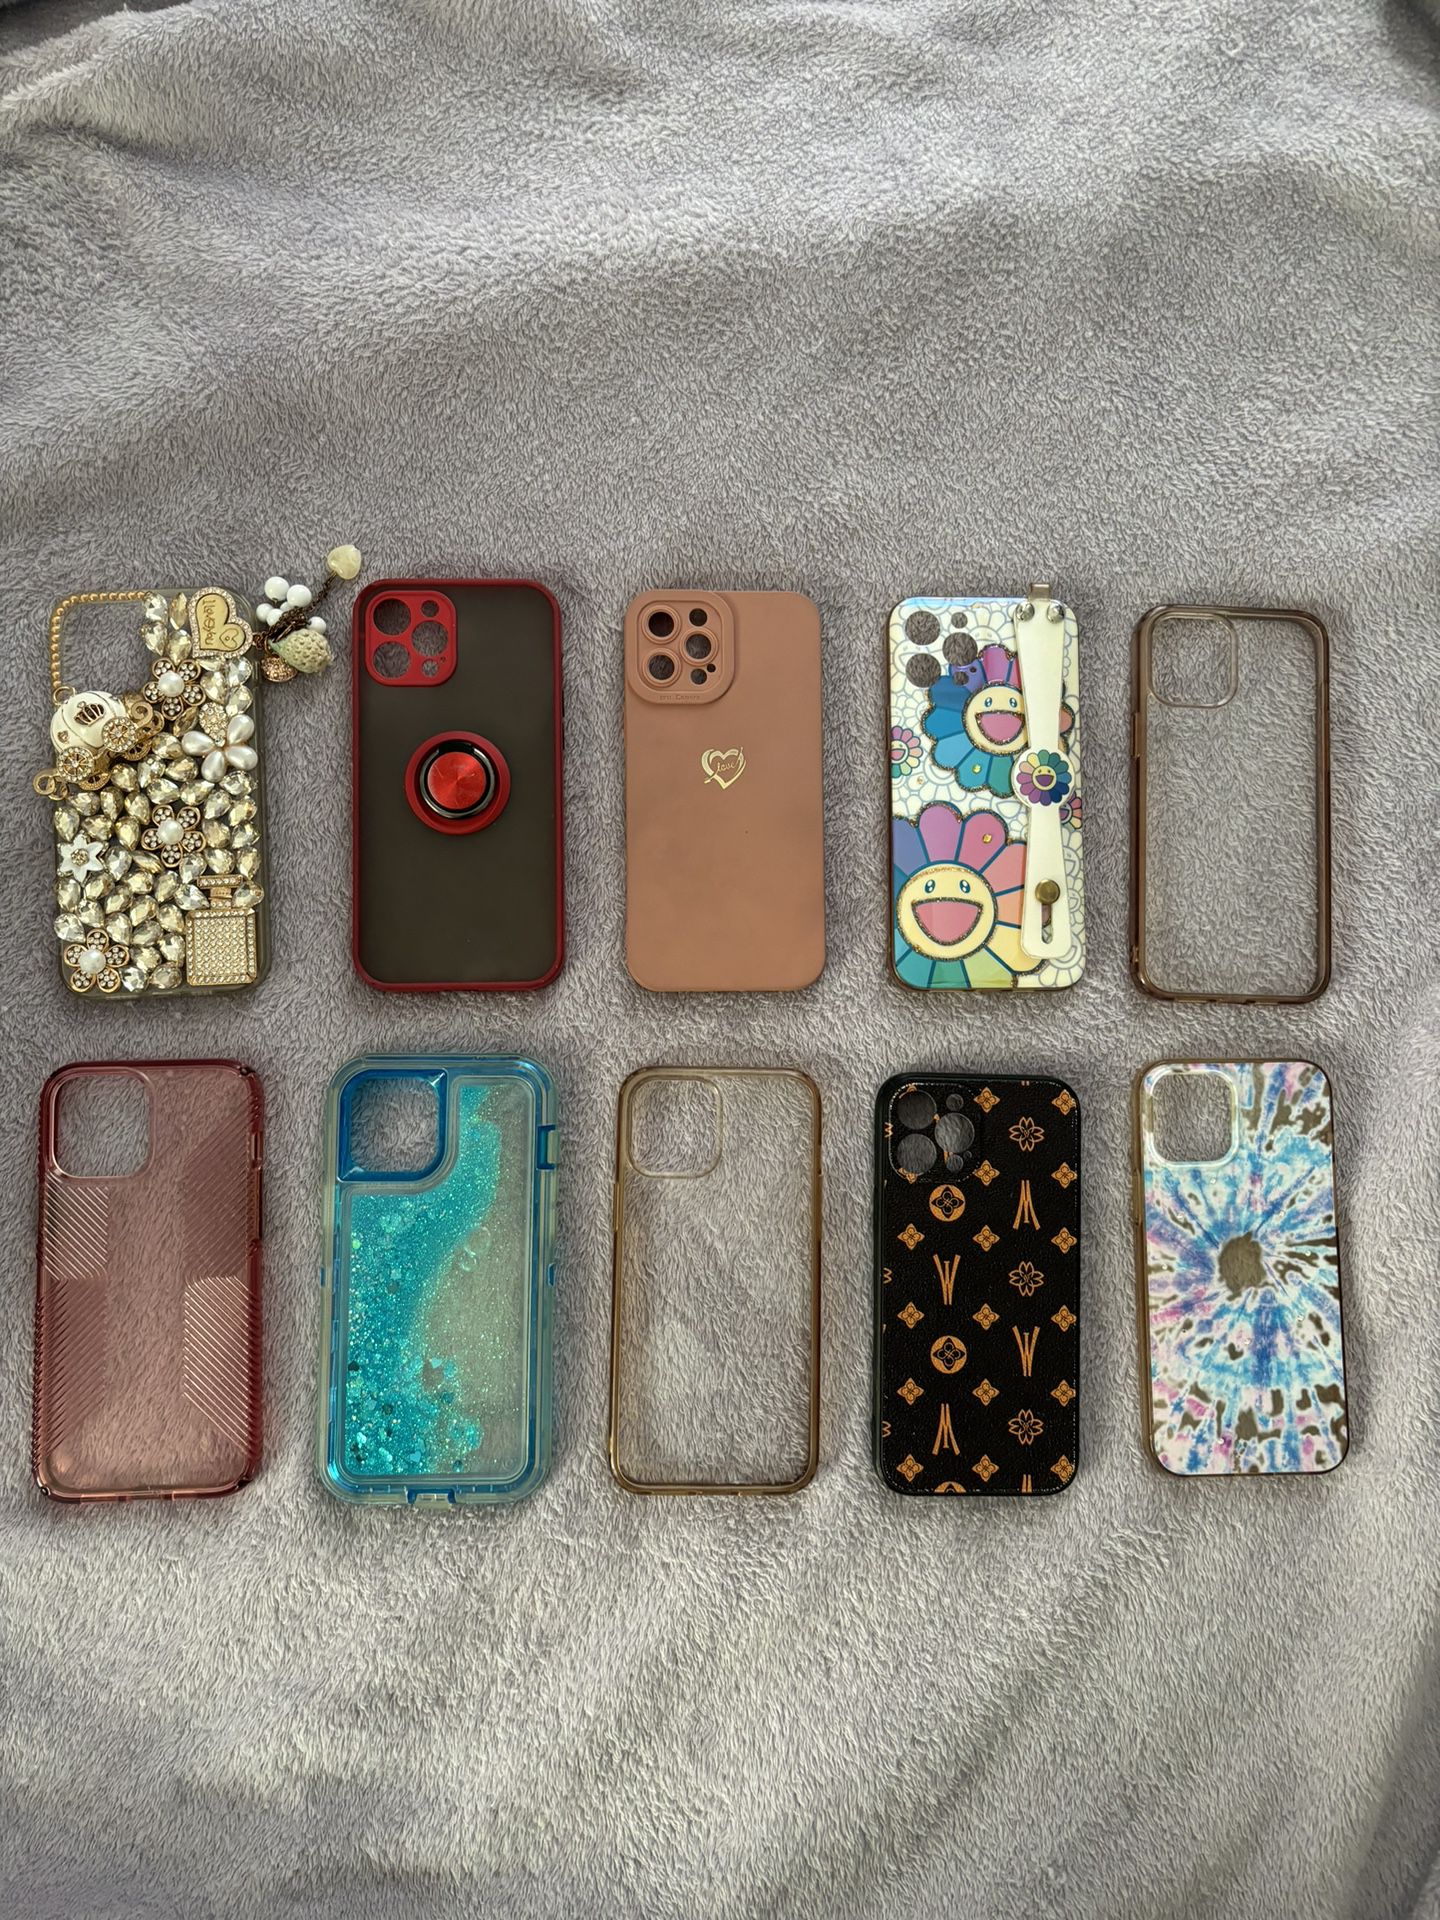 Phone Cases and Screen Protectors 